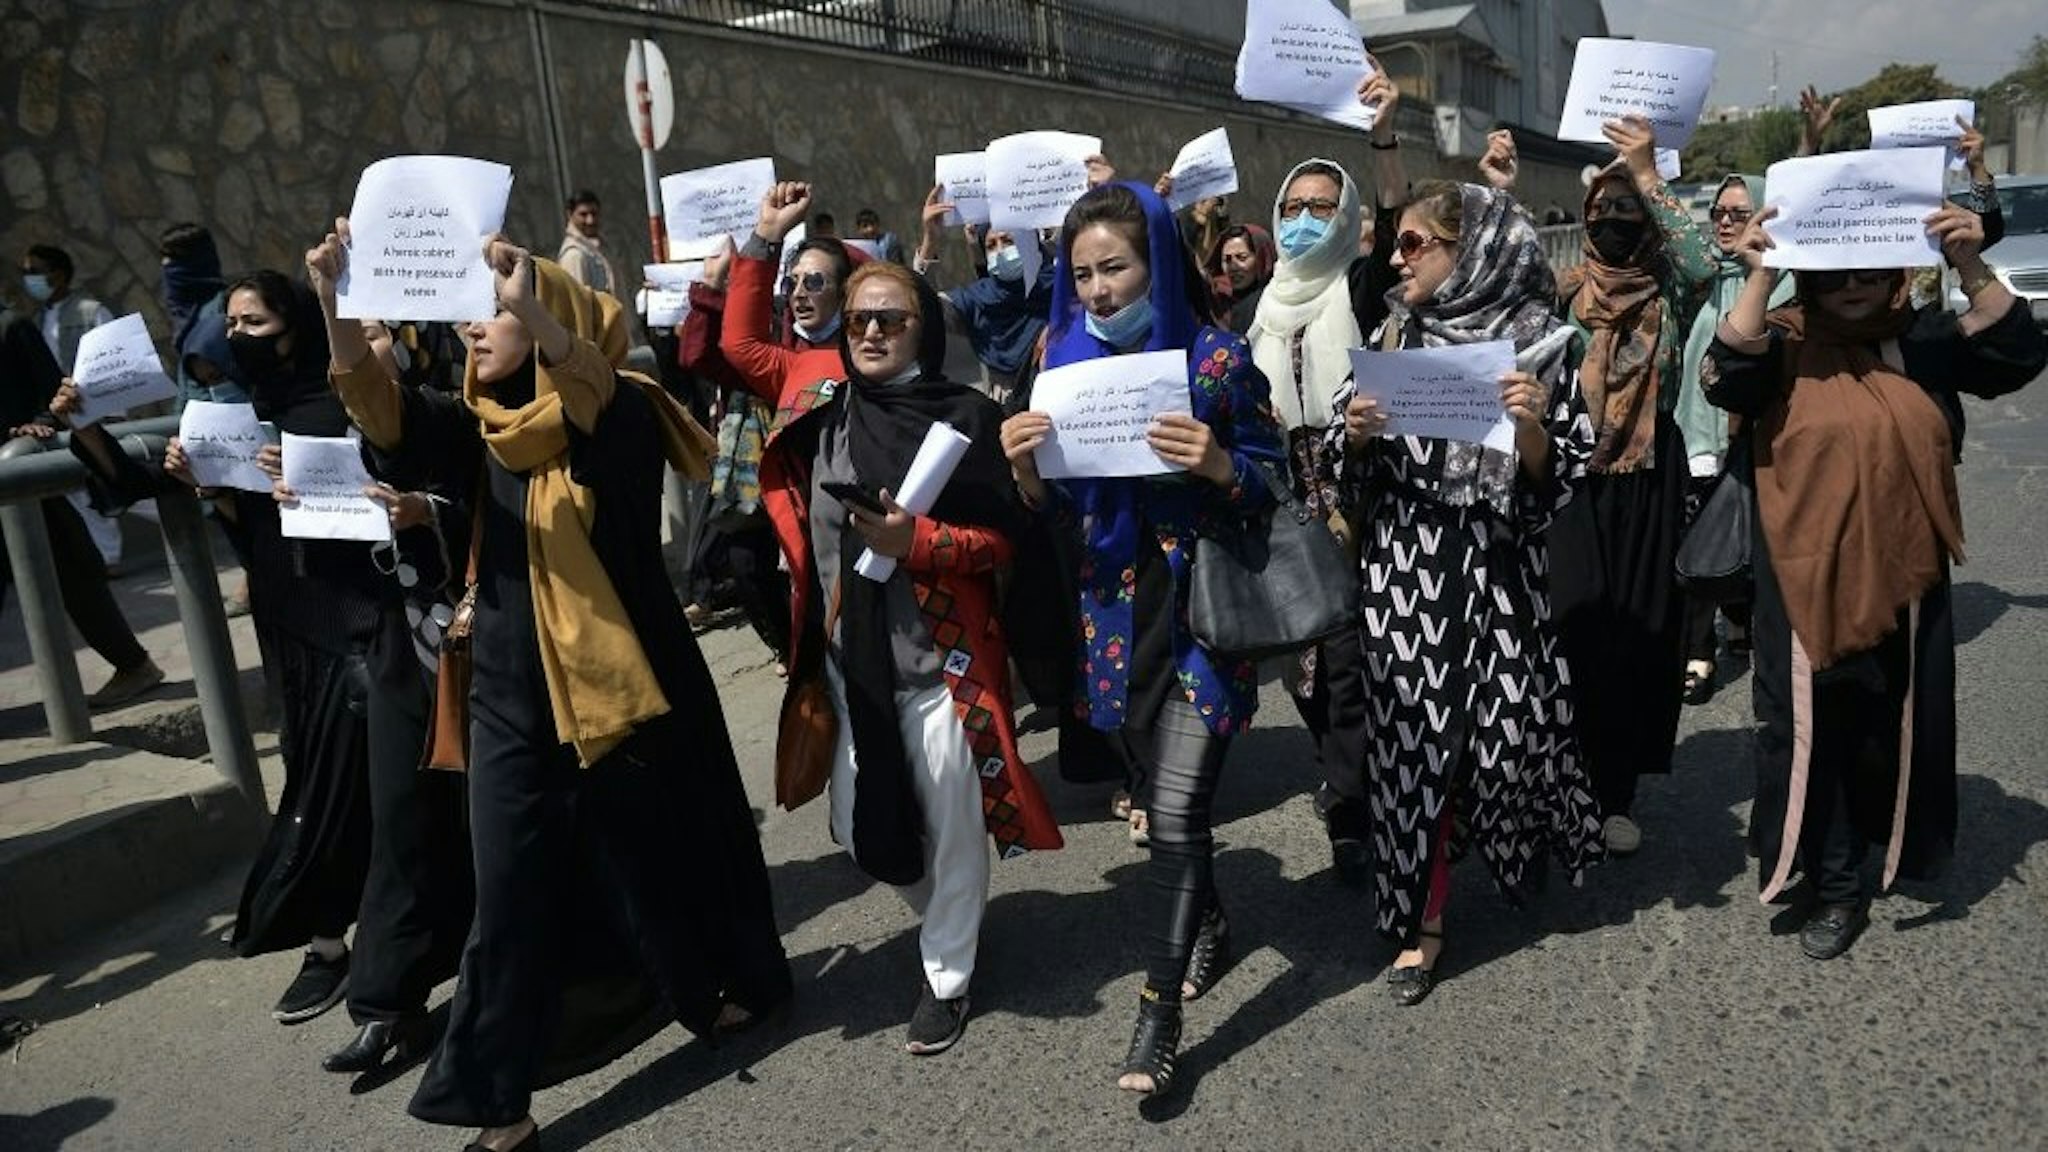 TOPSHOT-AFGHANISTAN-CONFLICT-WOMEN TOPSHOT - Afghan women take part in a protest march for their rights under the Taliban rule in the downtown area of Kabul on September 3, 2021. (Photo by HOSHANG HASHIMI / AFP) (Photo by HOSHANG HASHIMI/AFP via Getty Images)HOSHANG HASHIMI / Contributor